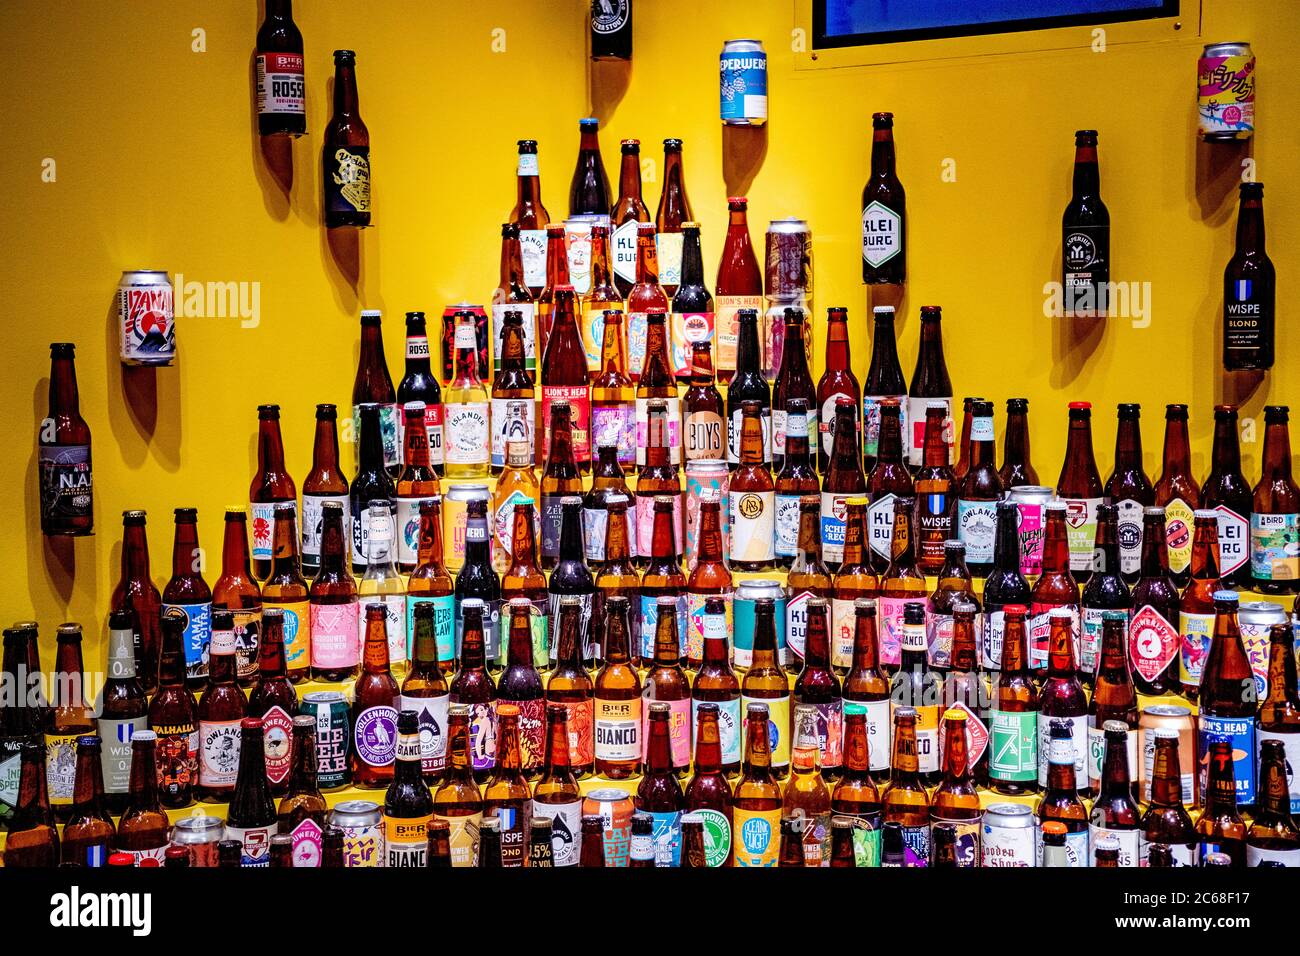 A wall decorated with beer bottles during the beer exhibition.Amsterdam Museum presents the exhibition Beer.  Amsterdam is known as the city of beer and brewers. In the exhibition Beer, visitors can learn all about the capital's beer history. Many Amsterdam mayors were brewers, breweries such as Heineken once started there and today the city has no less than 45 beer breweries. Stock Photo